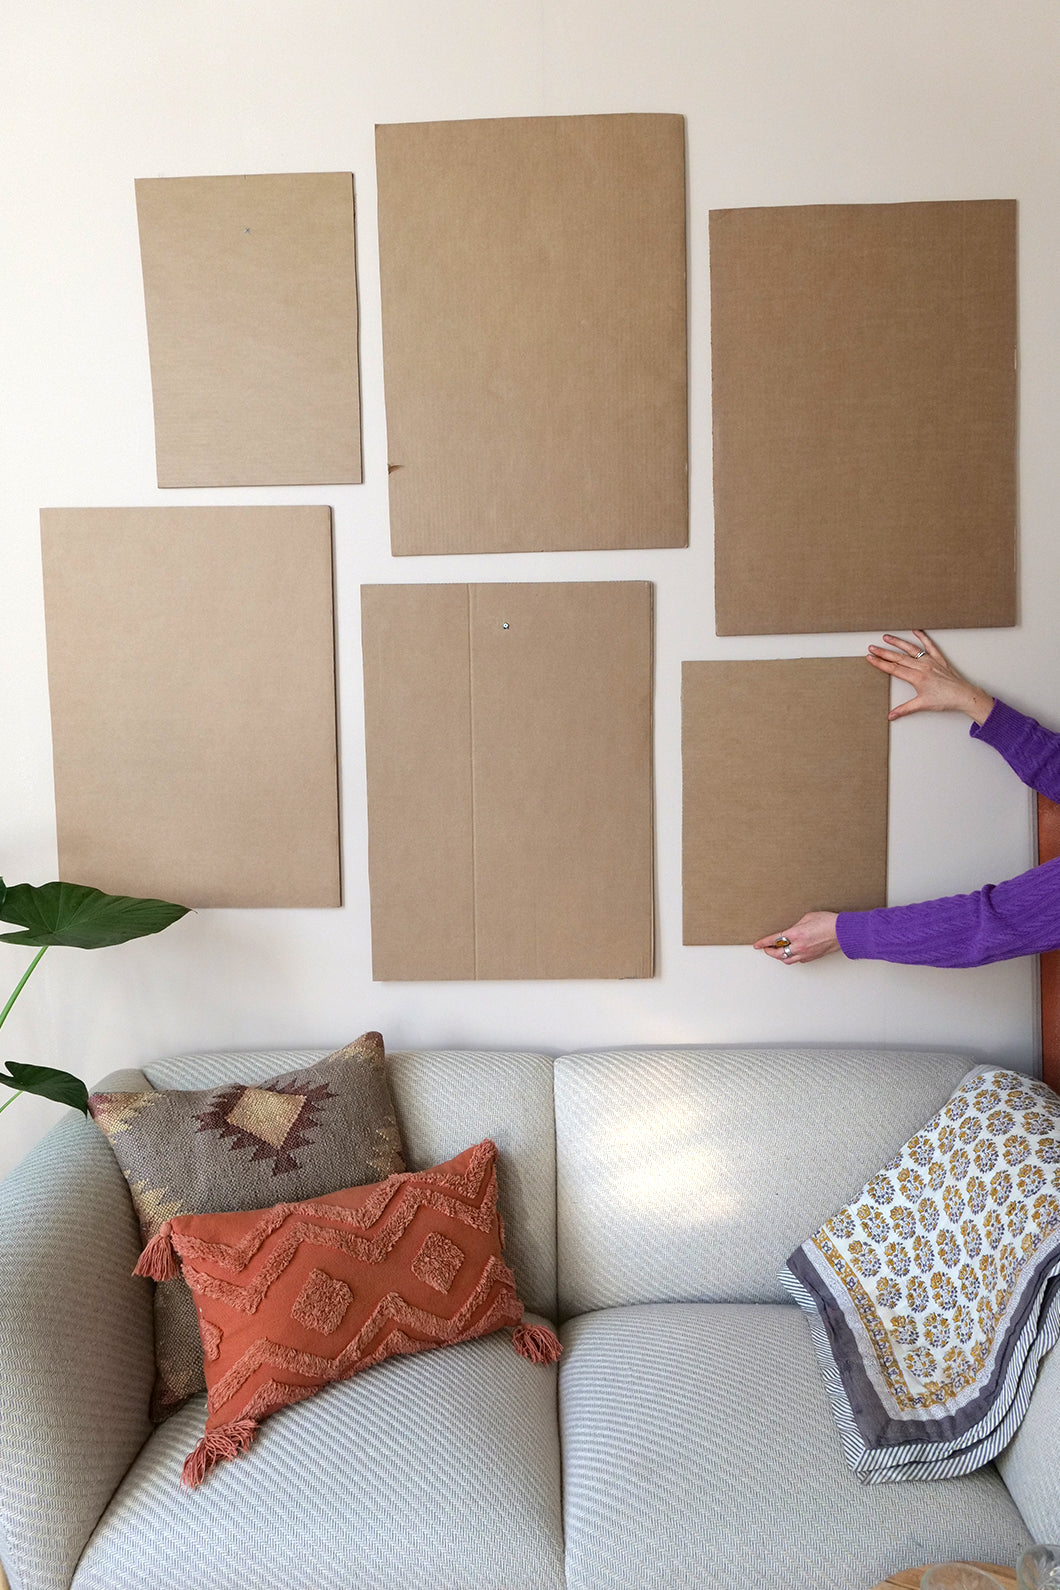 How to hang a gallery wall in 5 steps